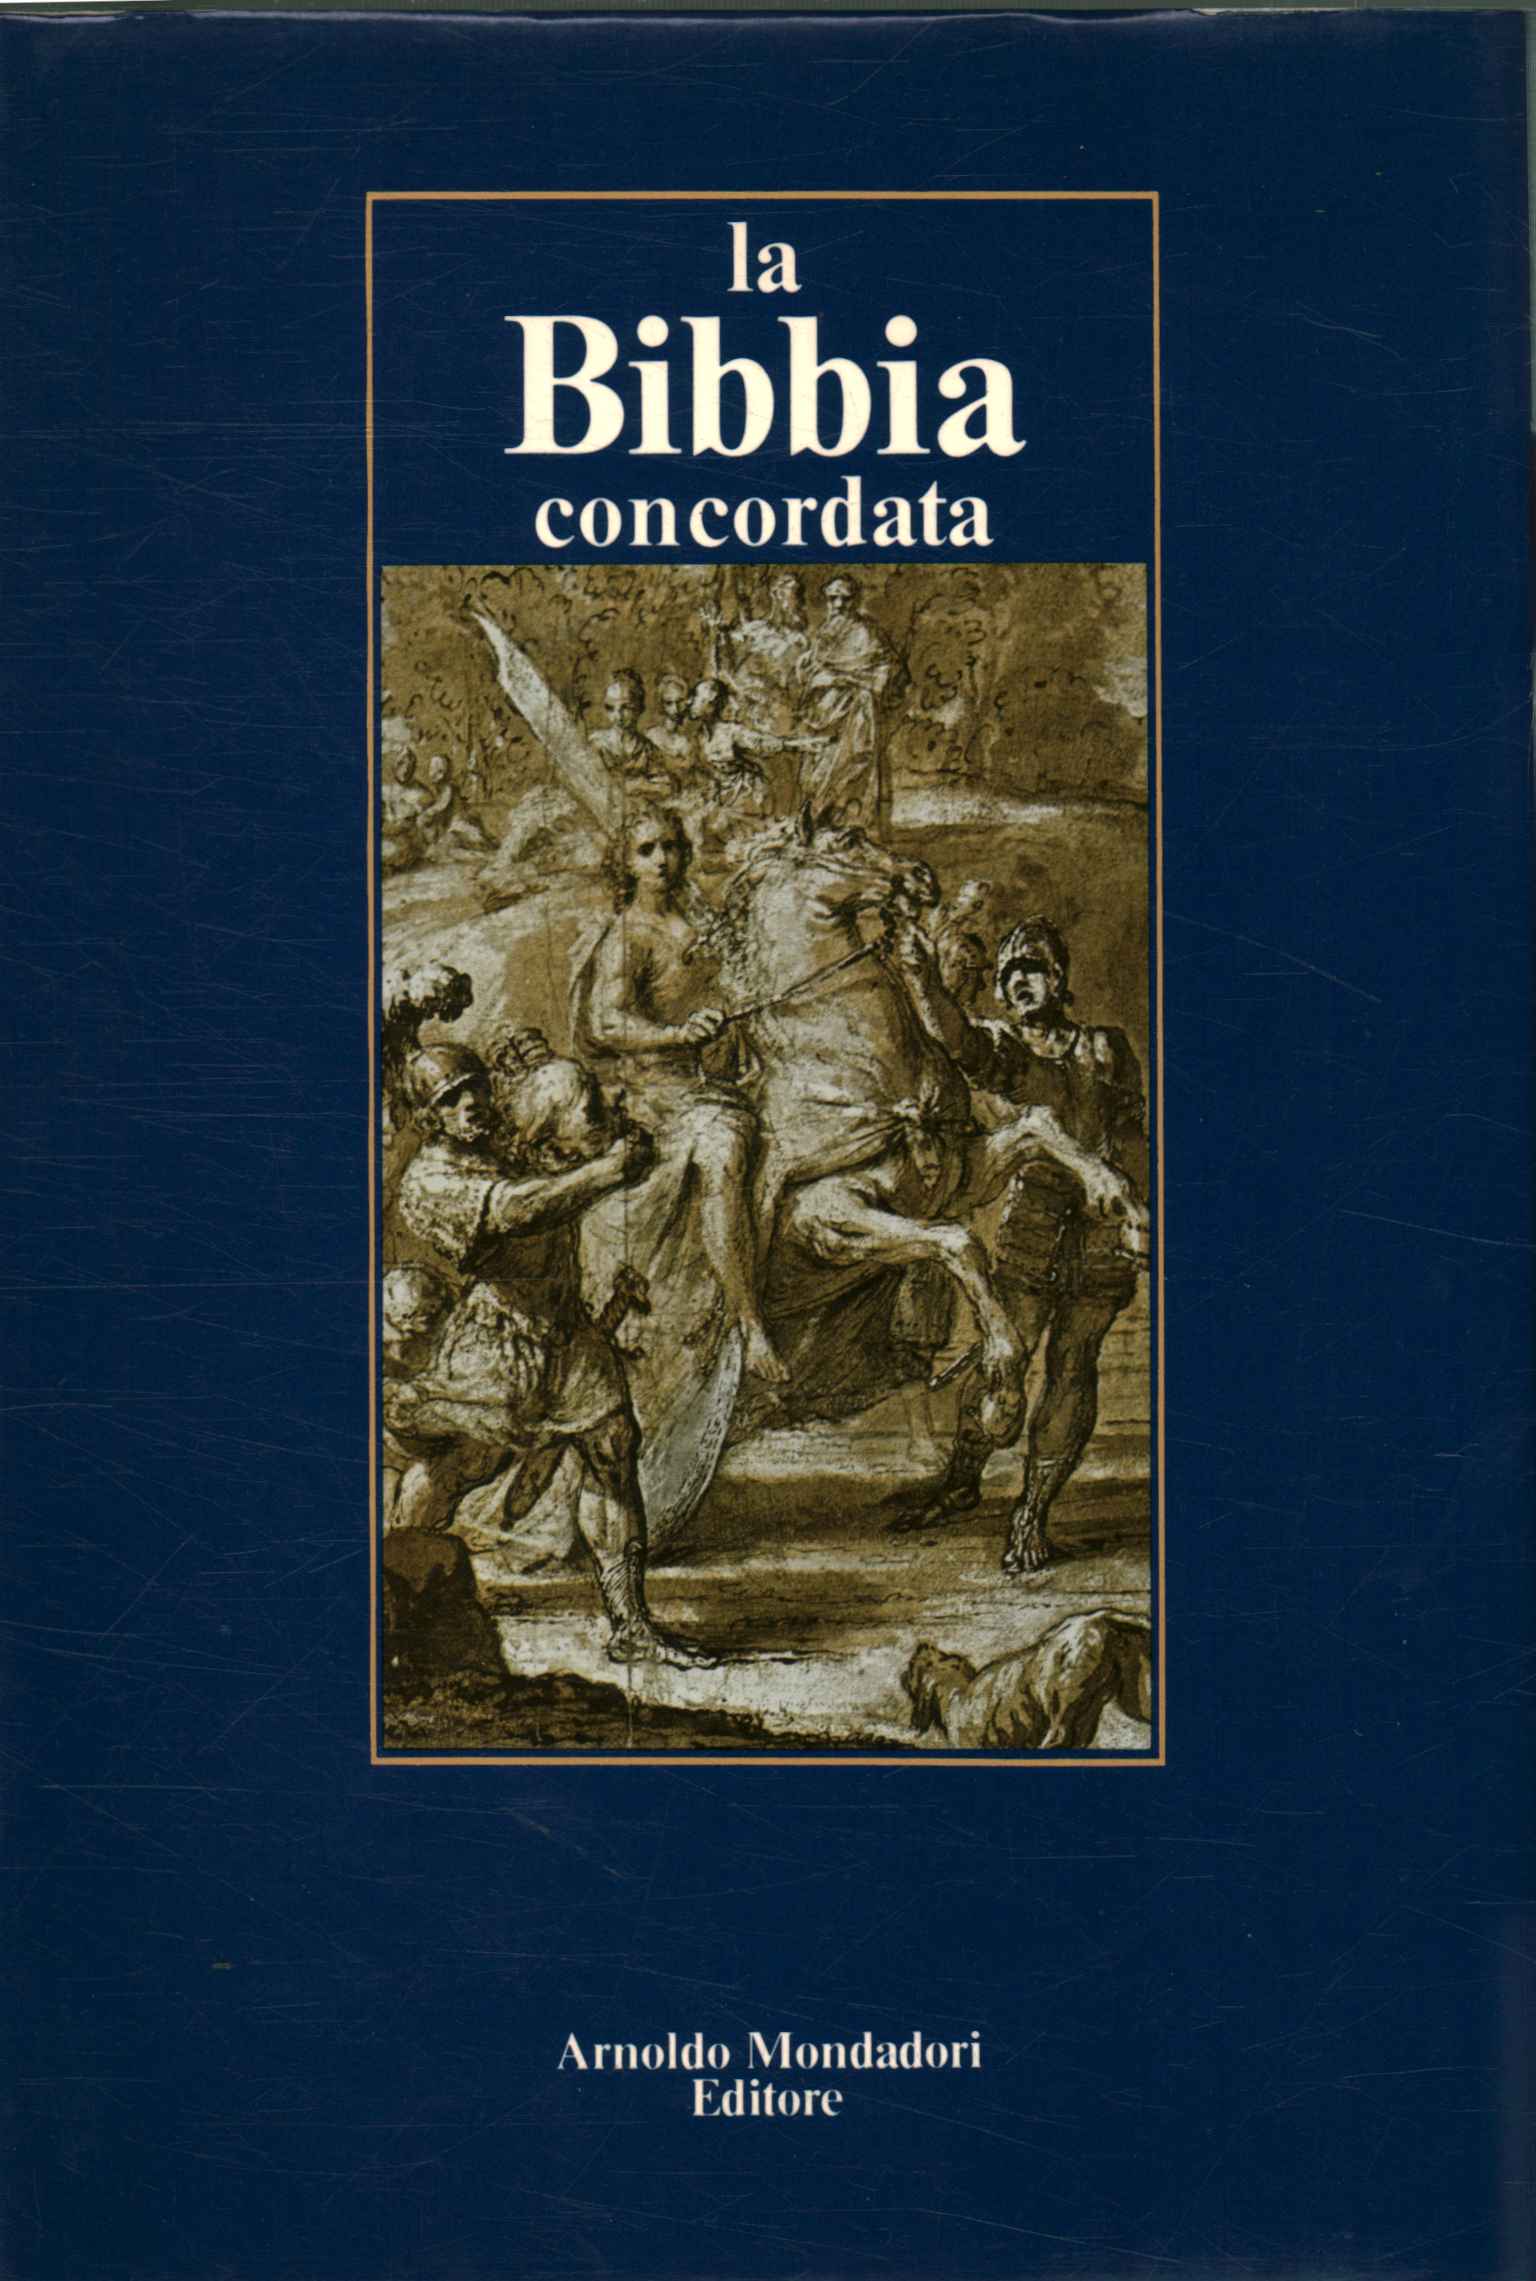 The agreed Bible